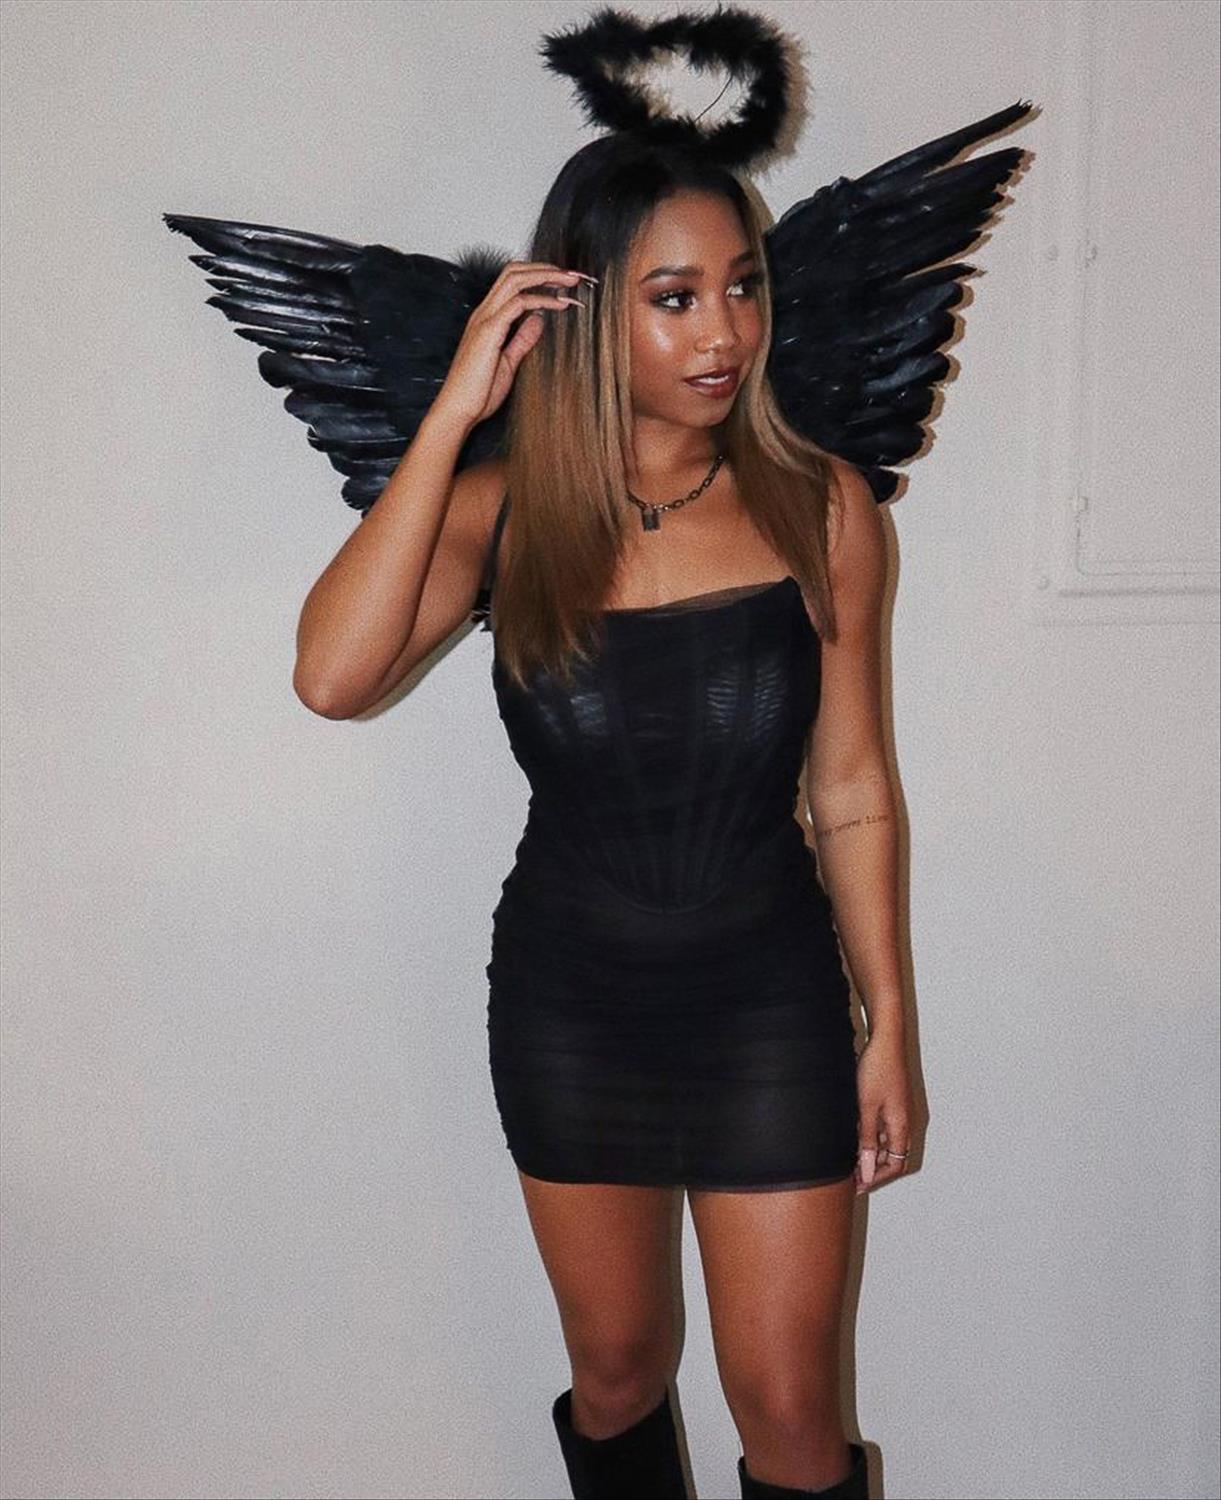 Cool Solo Halloween Costume Ideas for College Girls